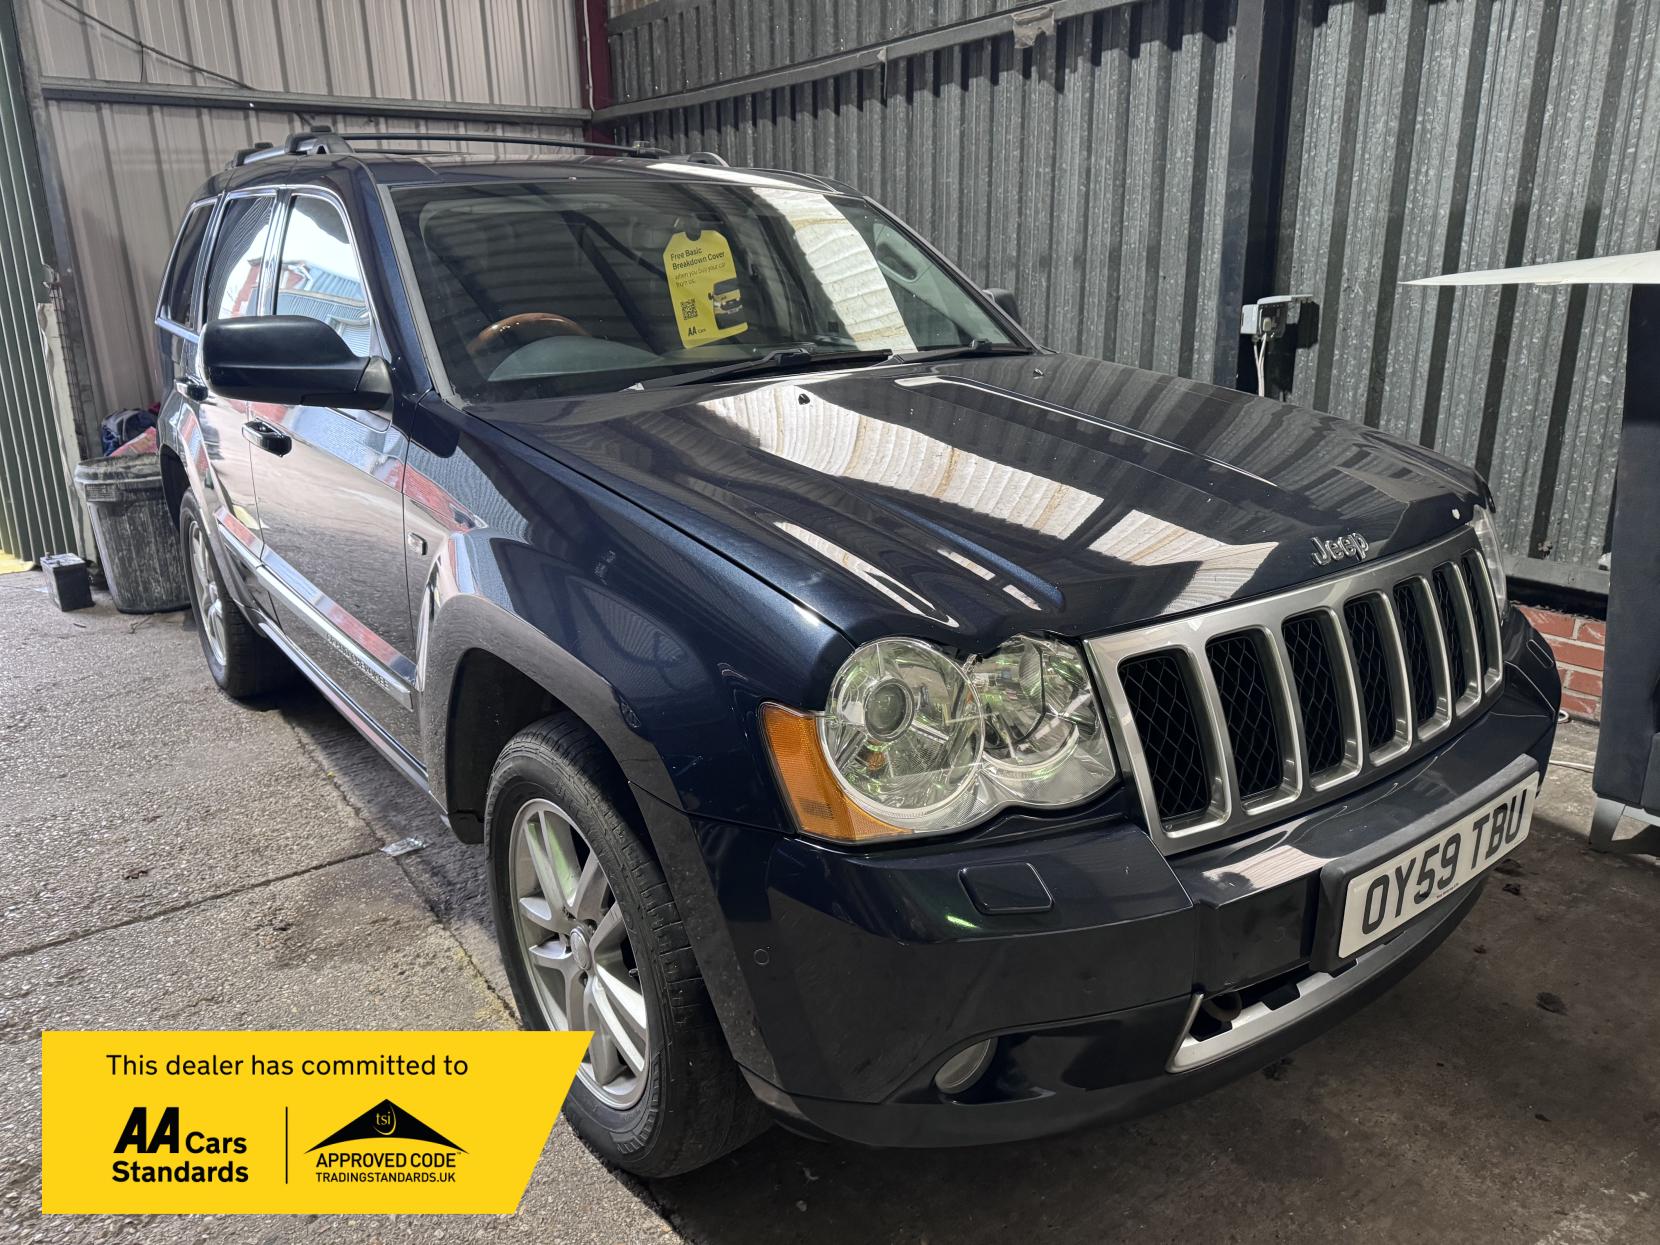 Jeep Grand Cherokee 3.0 CRD Overland SUV 5dr Diesel Automatic 4WD (270 g/km, 215 bhp)